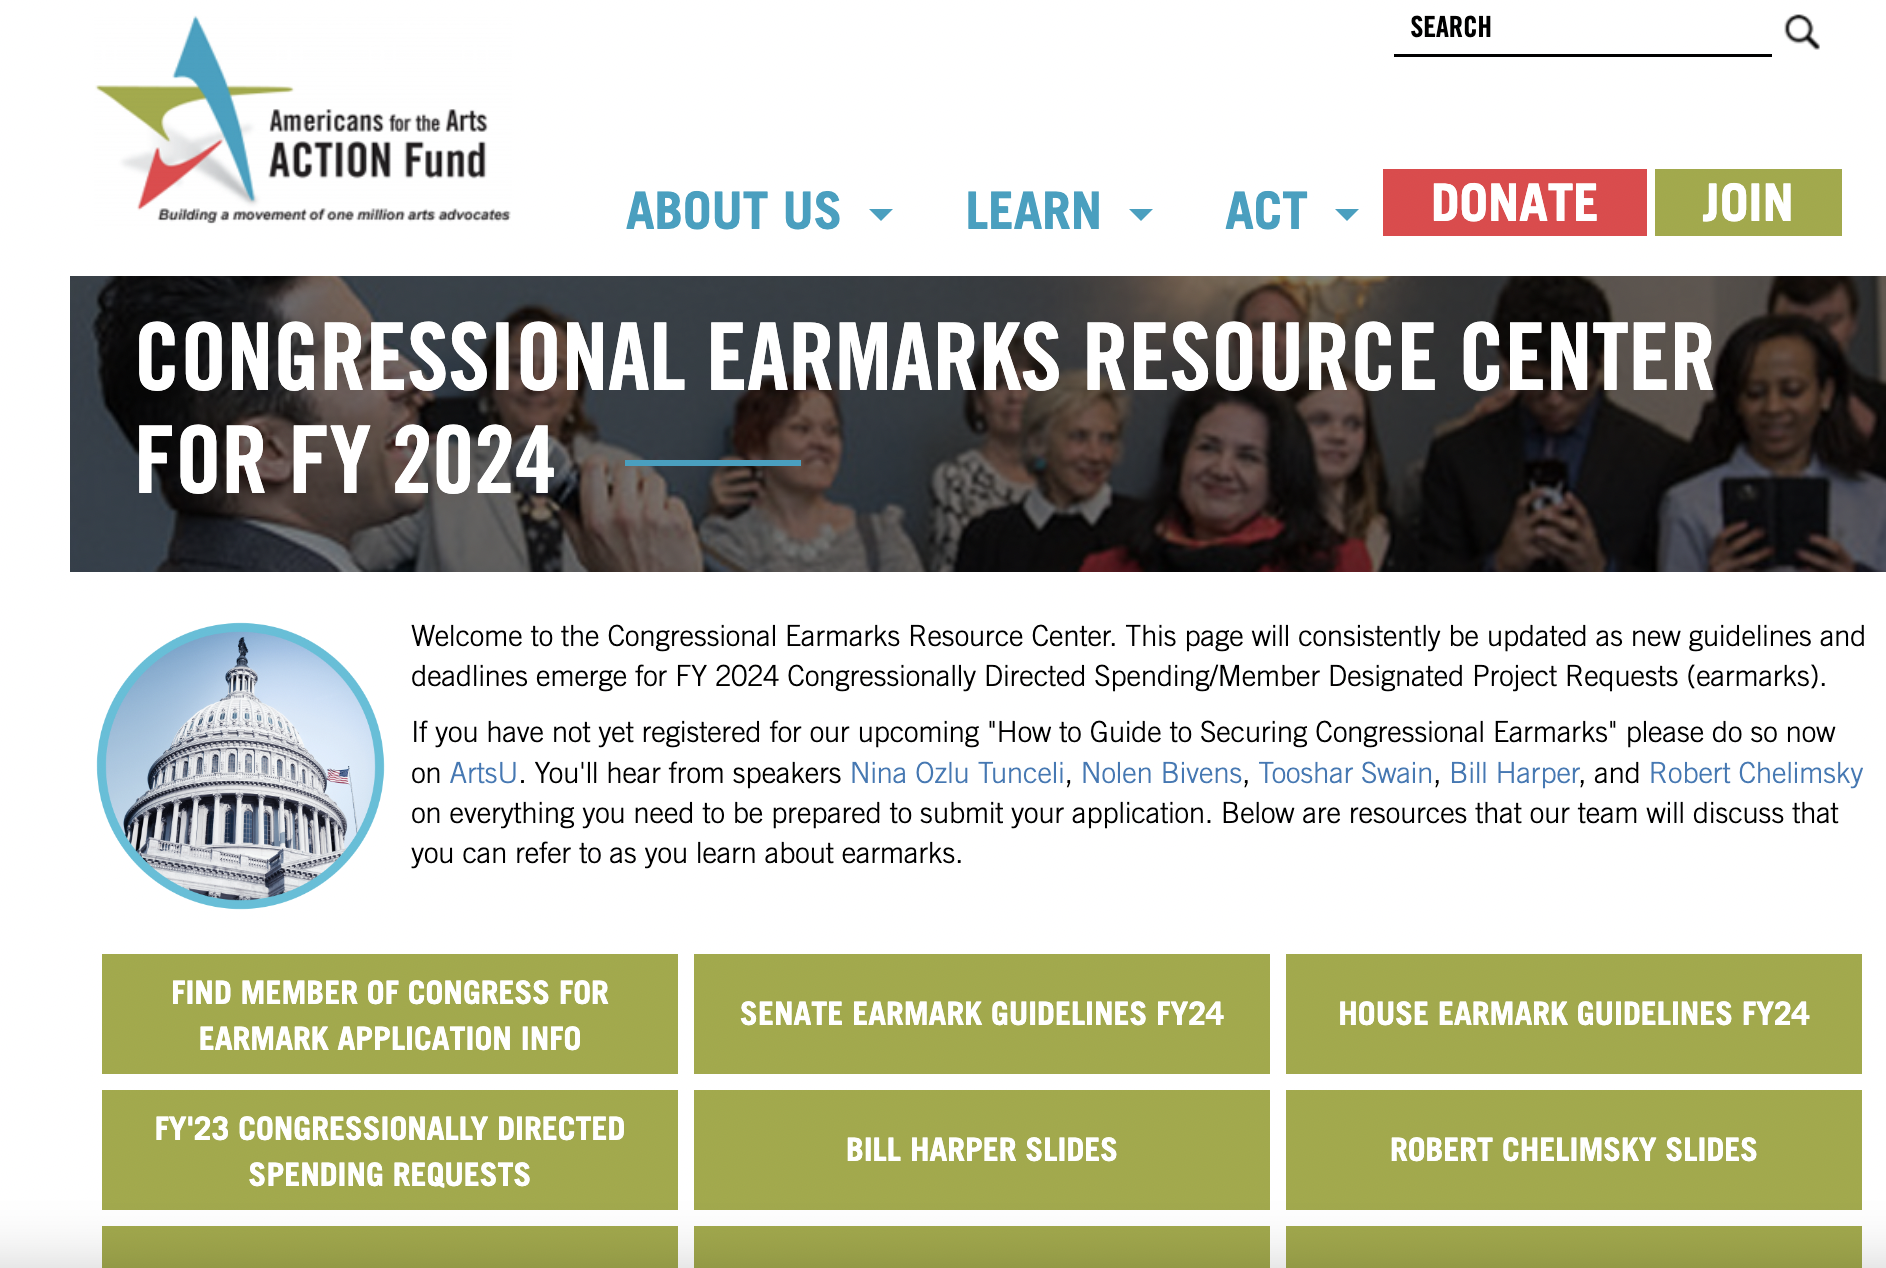 How to Guide for Securing Congressional Earmarks in 2023 Arts ActionFund